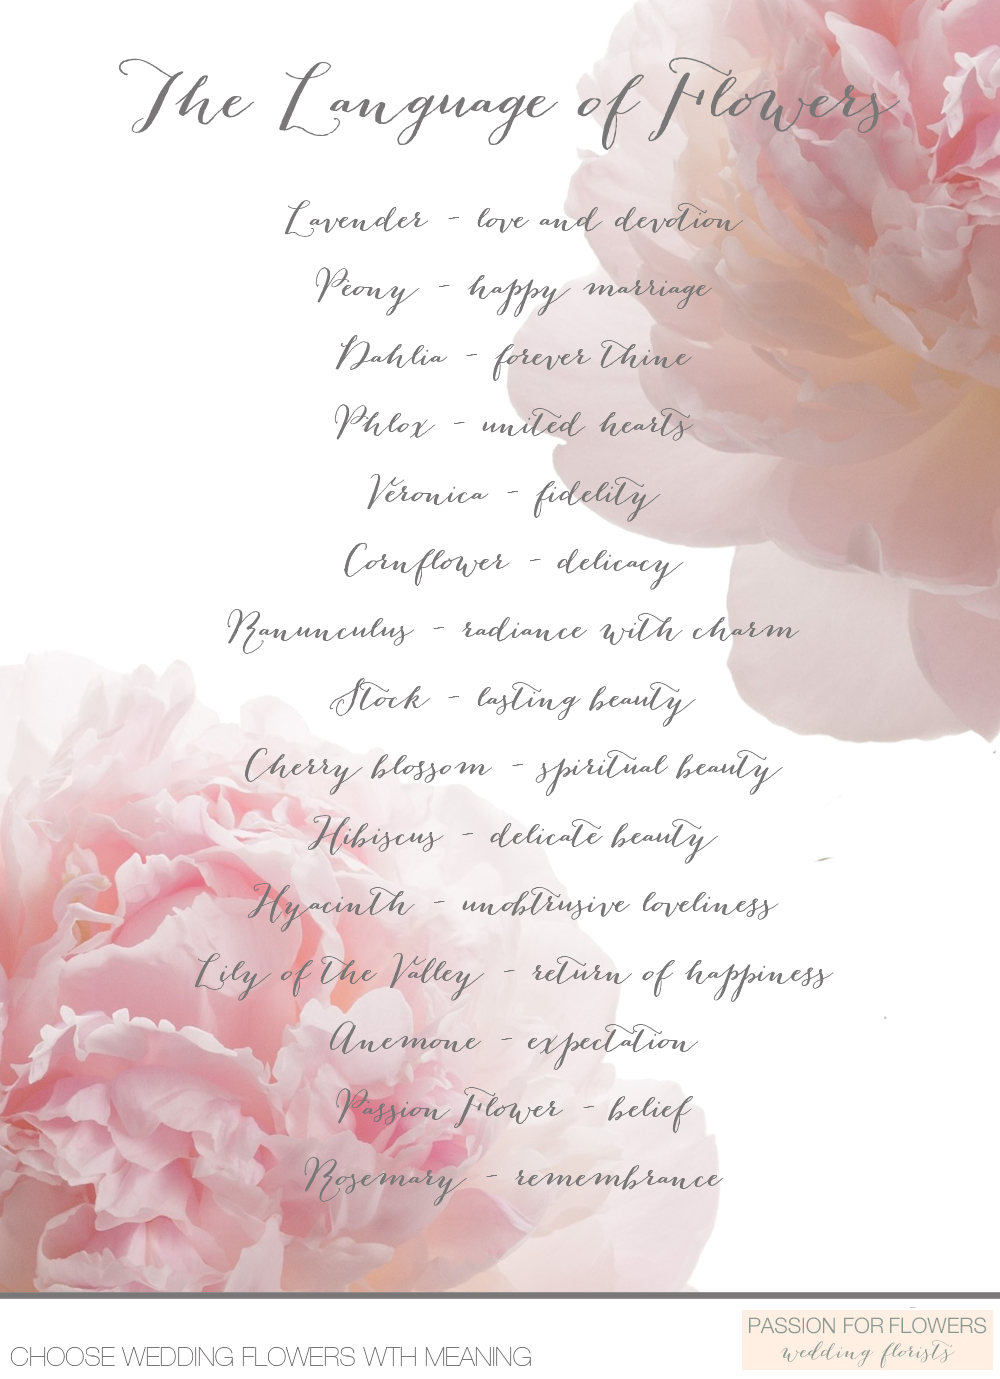 The Language Of Flowers - Meanings of Flowers / Roses